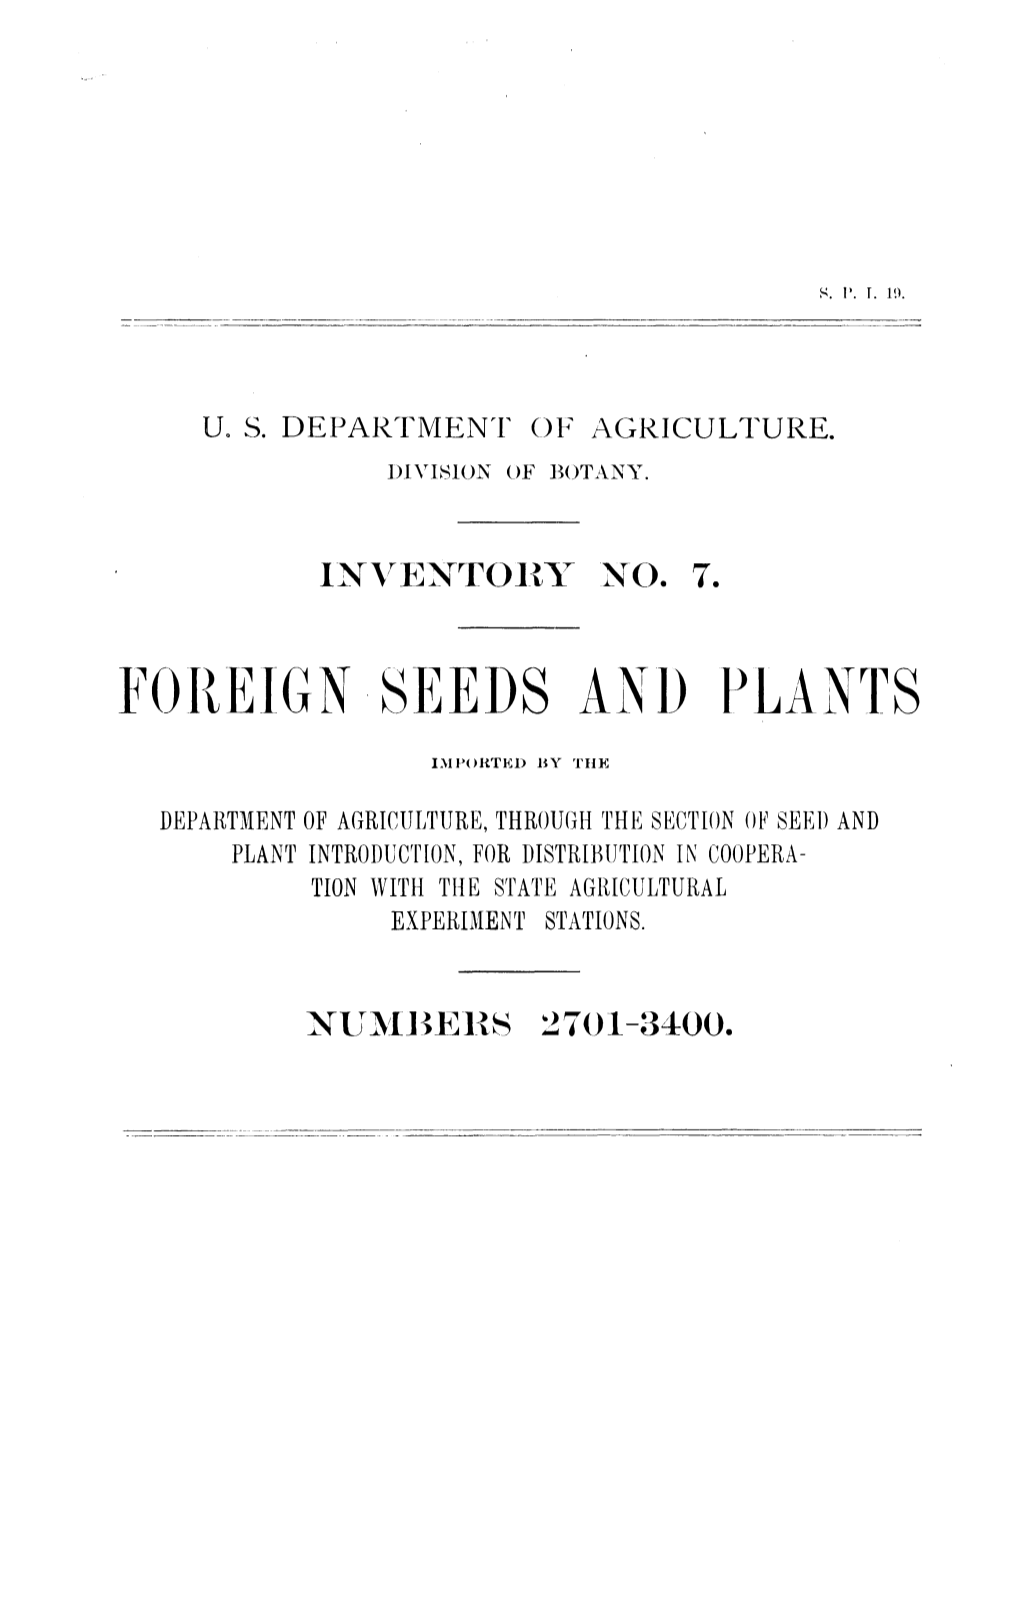 Foreign Seeds and Plants